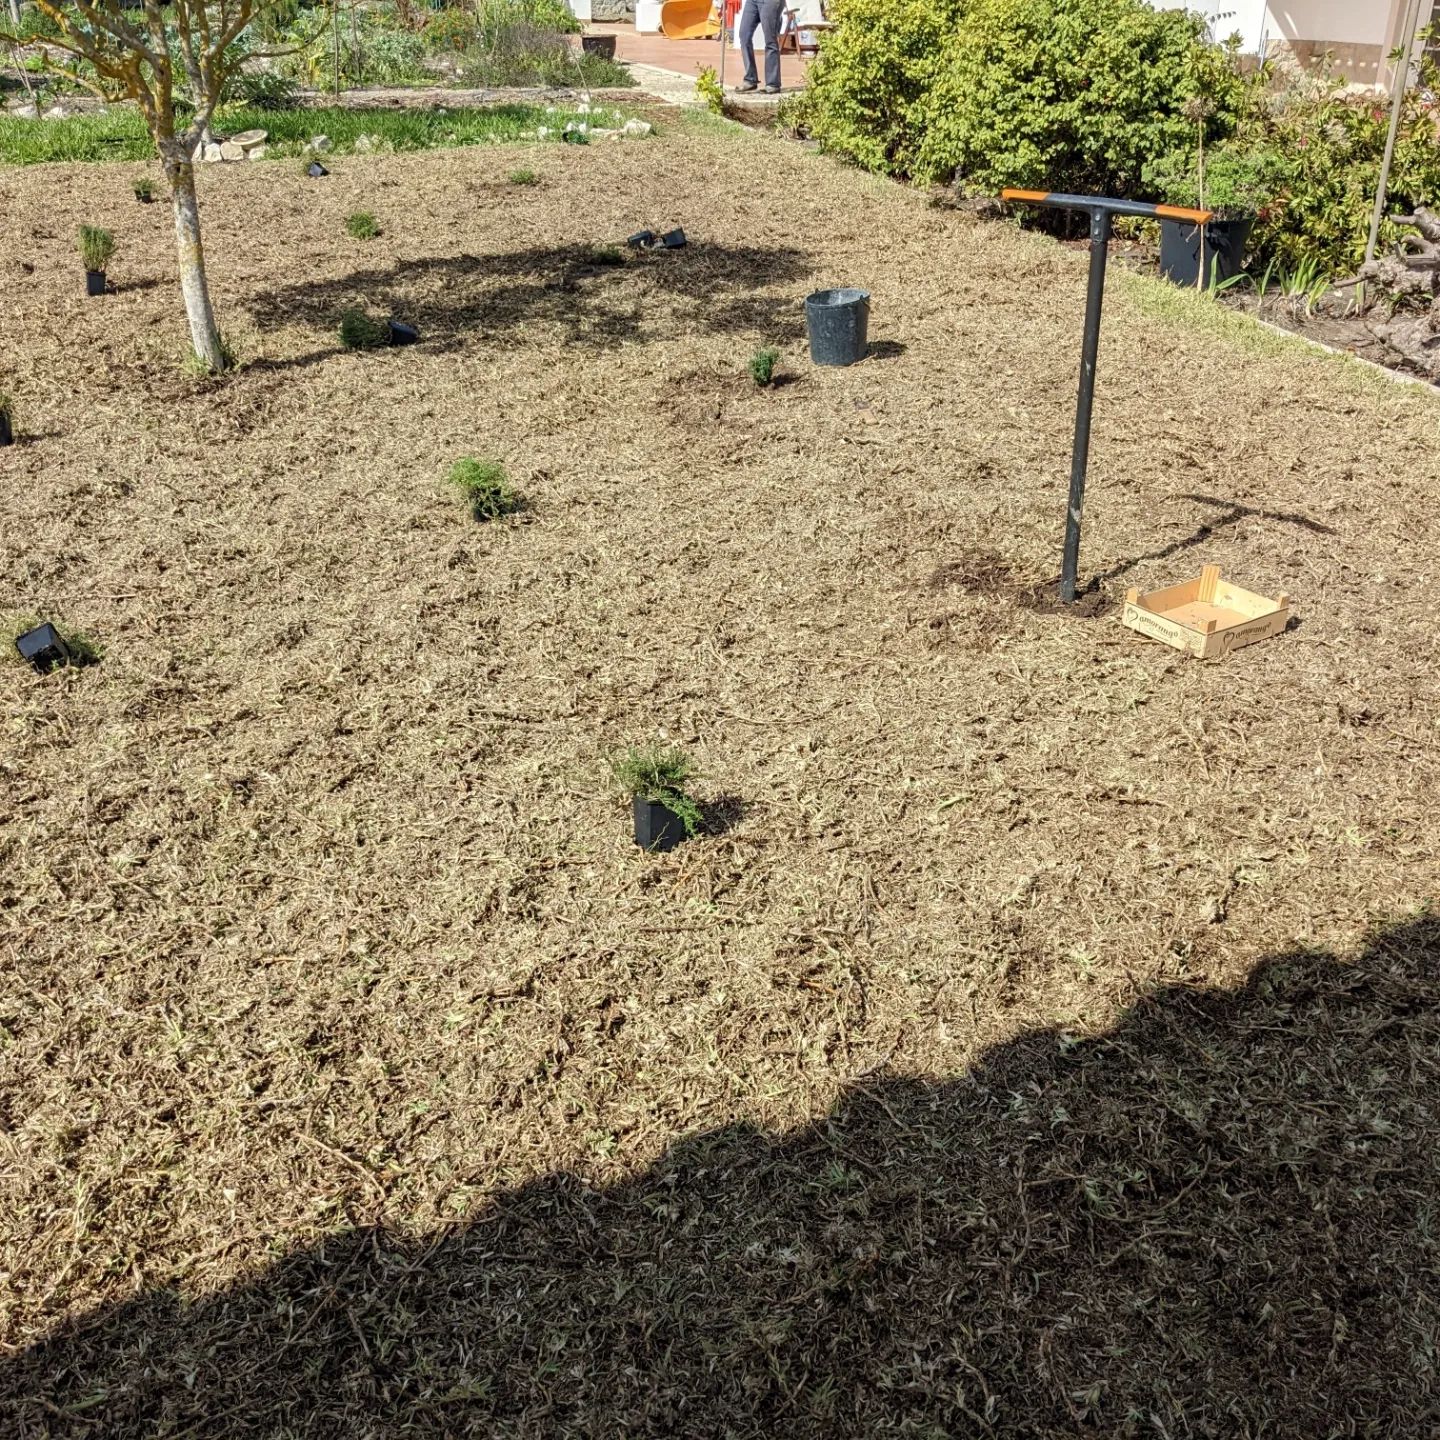 Part 2 of lawn upgrade: planting creeping thyme and lemon thyme